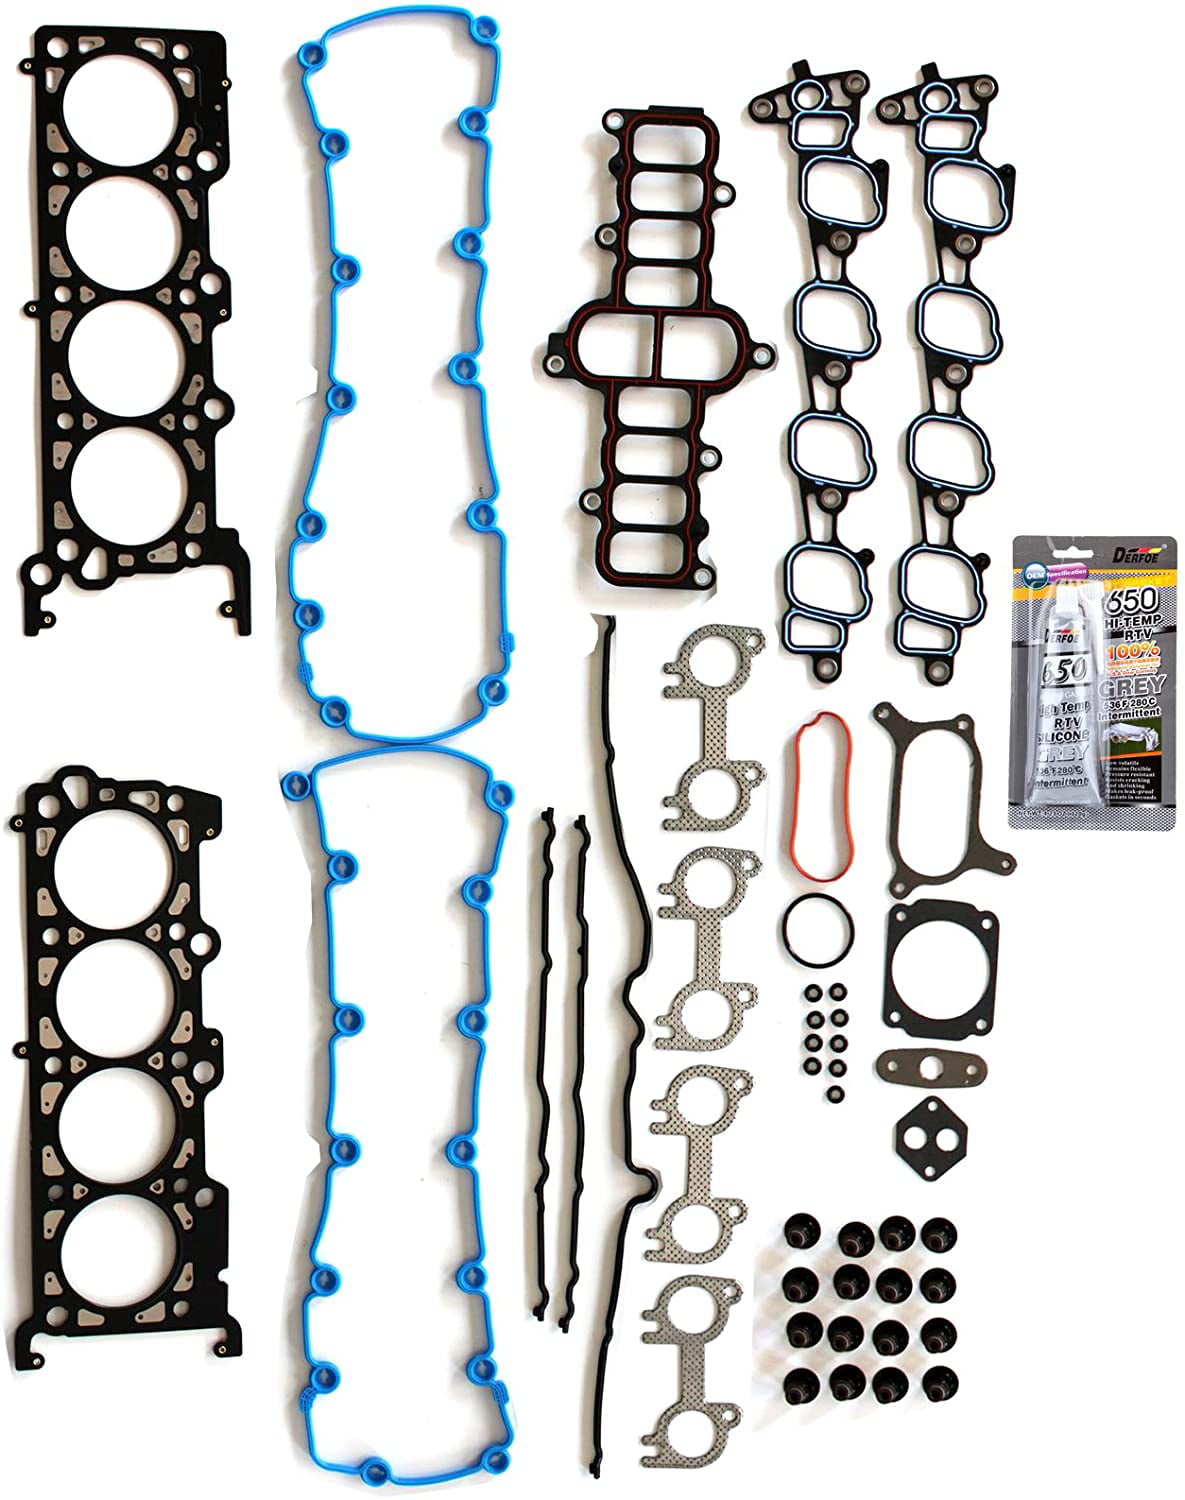 SCITOO Replacement for Head Gasket Set fit Ford F-150 2002-2003 4.6L VIN 6 Windsor Automotive Engine Head Gaskets Sets 